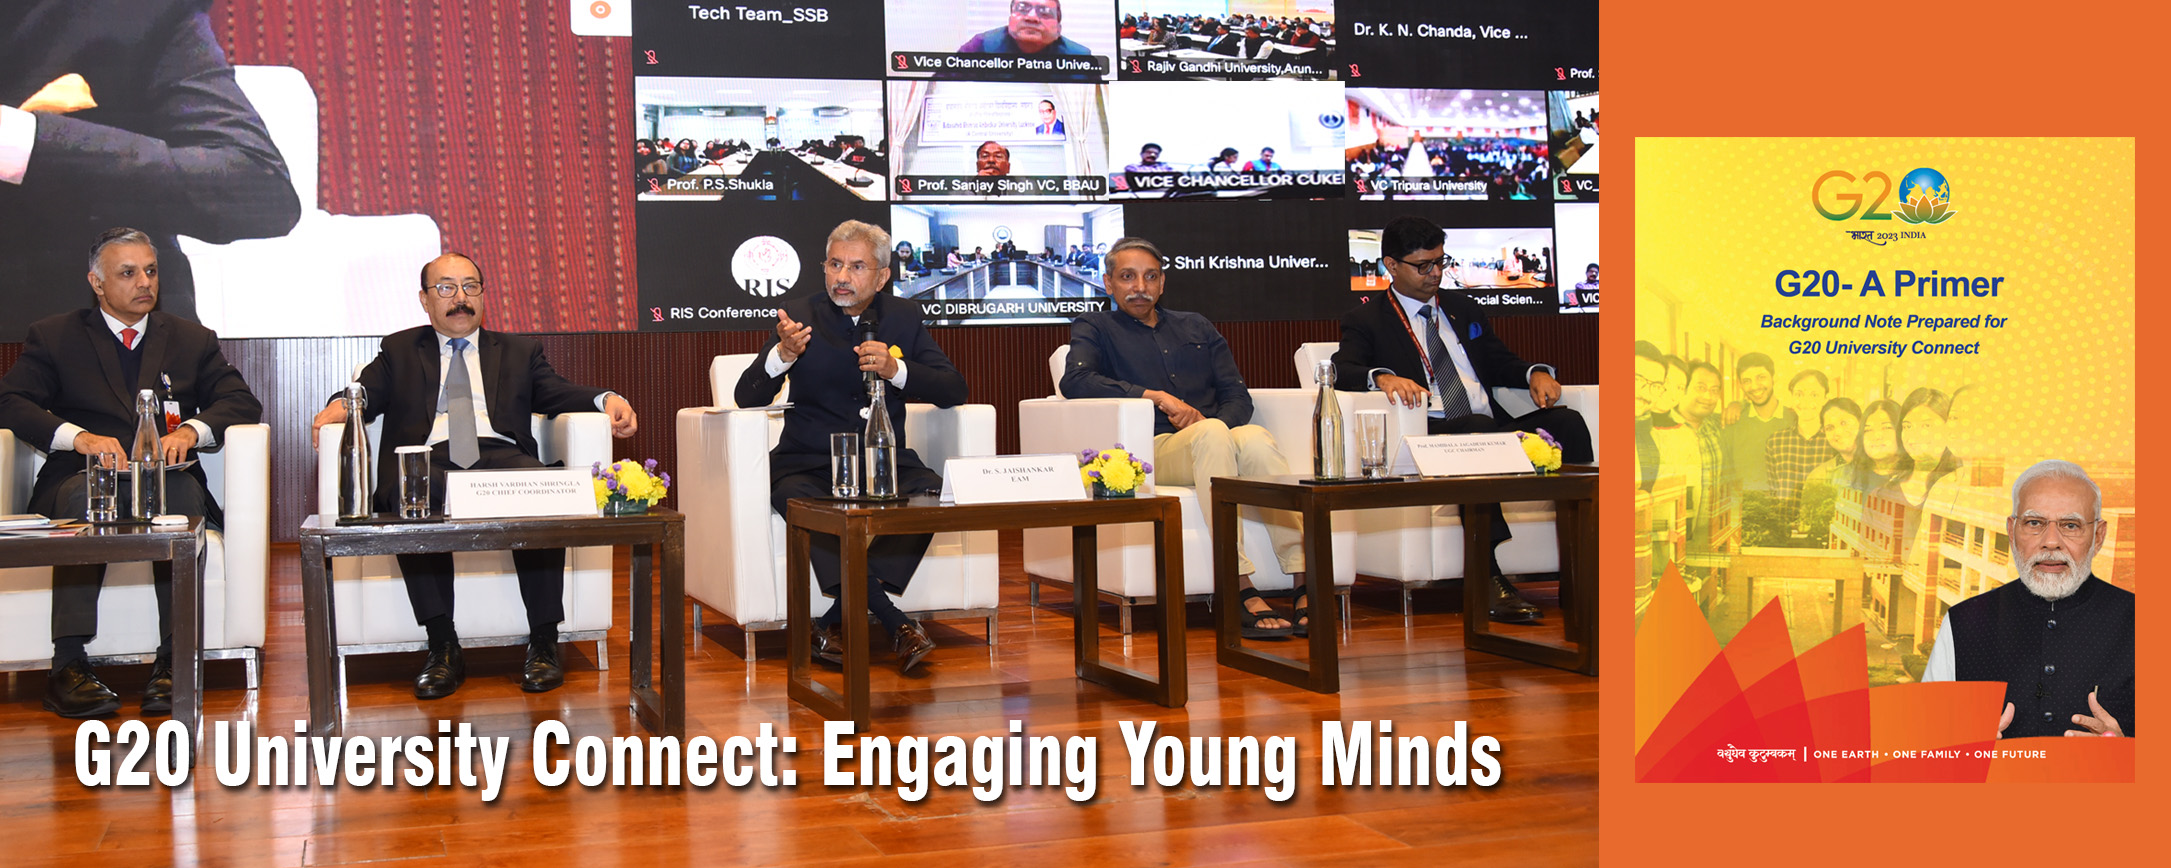 G20 University Connect Engaging Young Minds